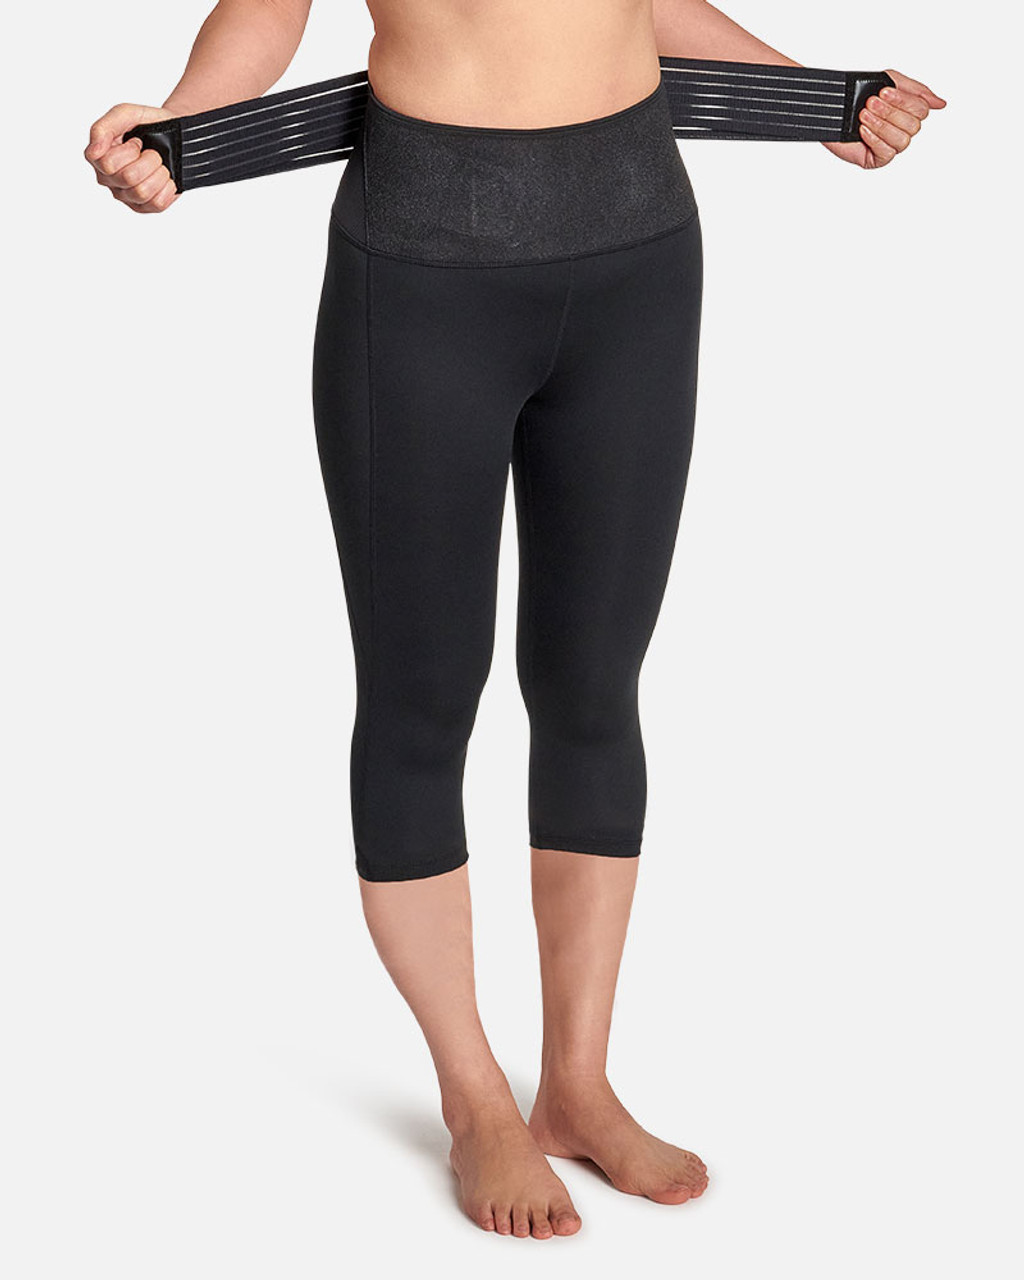 Lower Back Support Leggings with Adjustable Straps